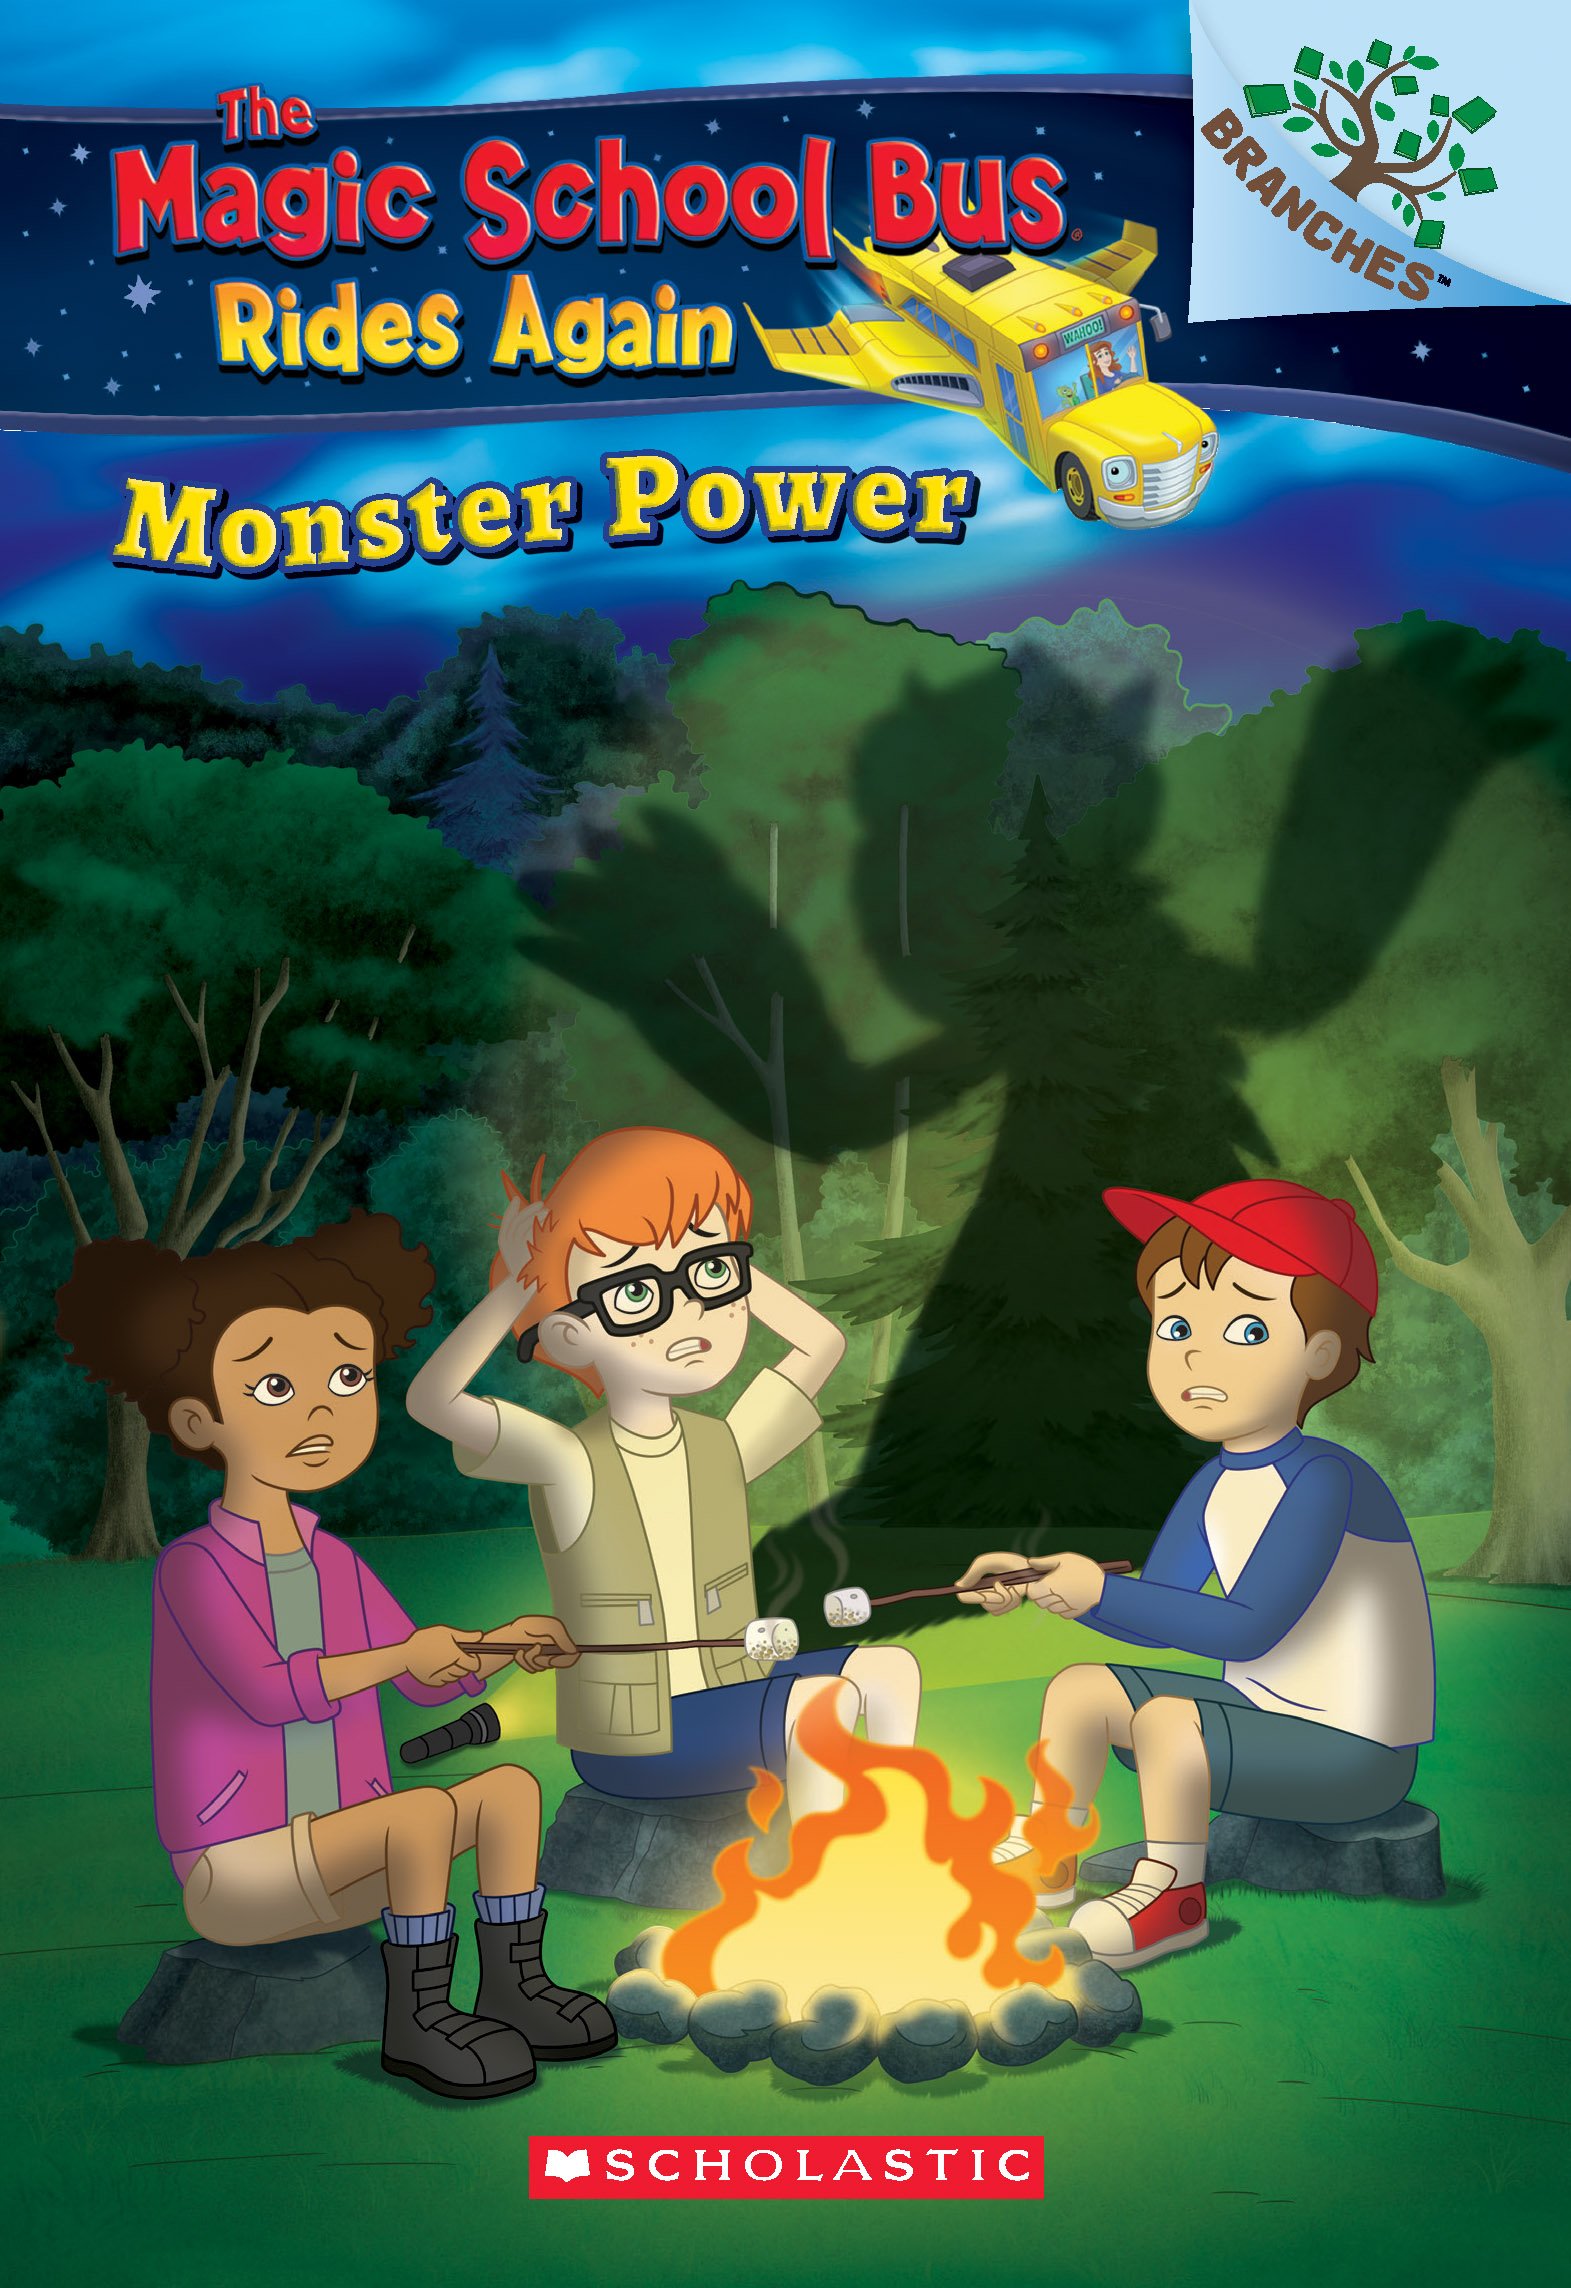 IMG : The Magic School Bus Rides Again Monster Power Branches